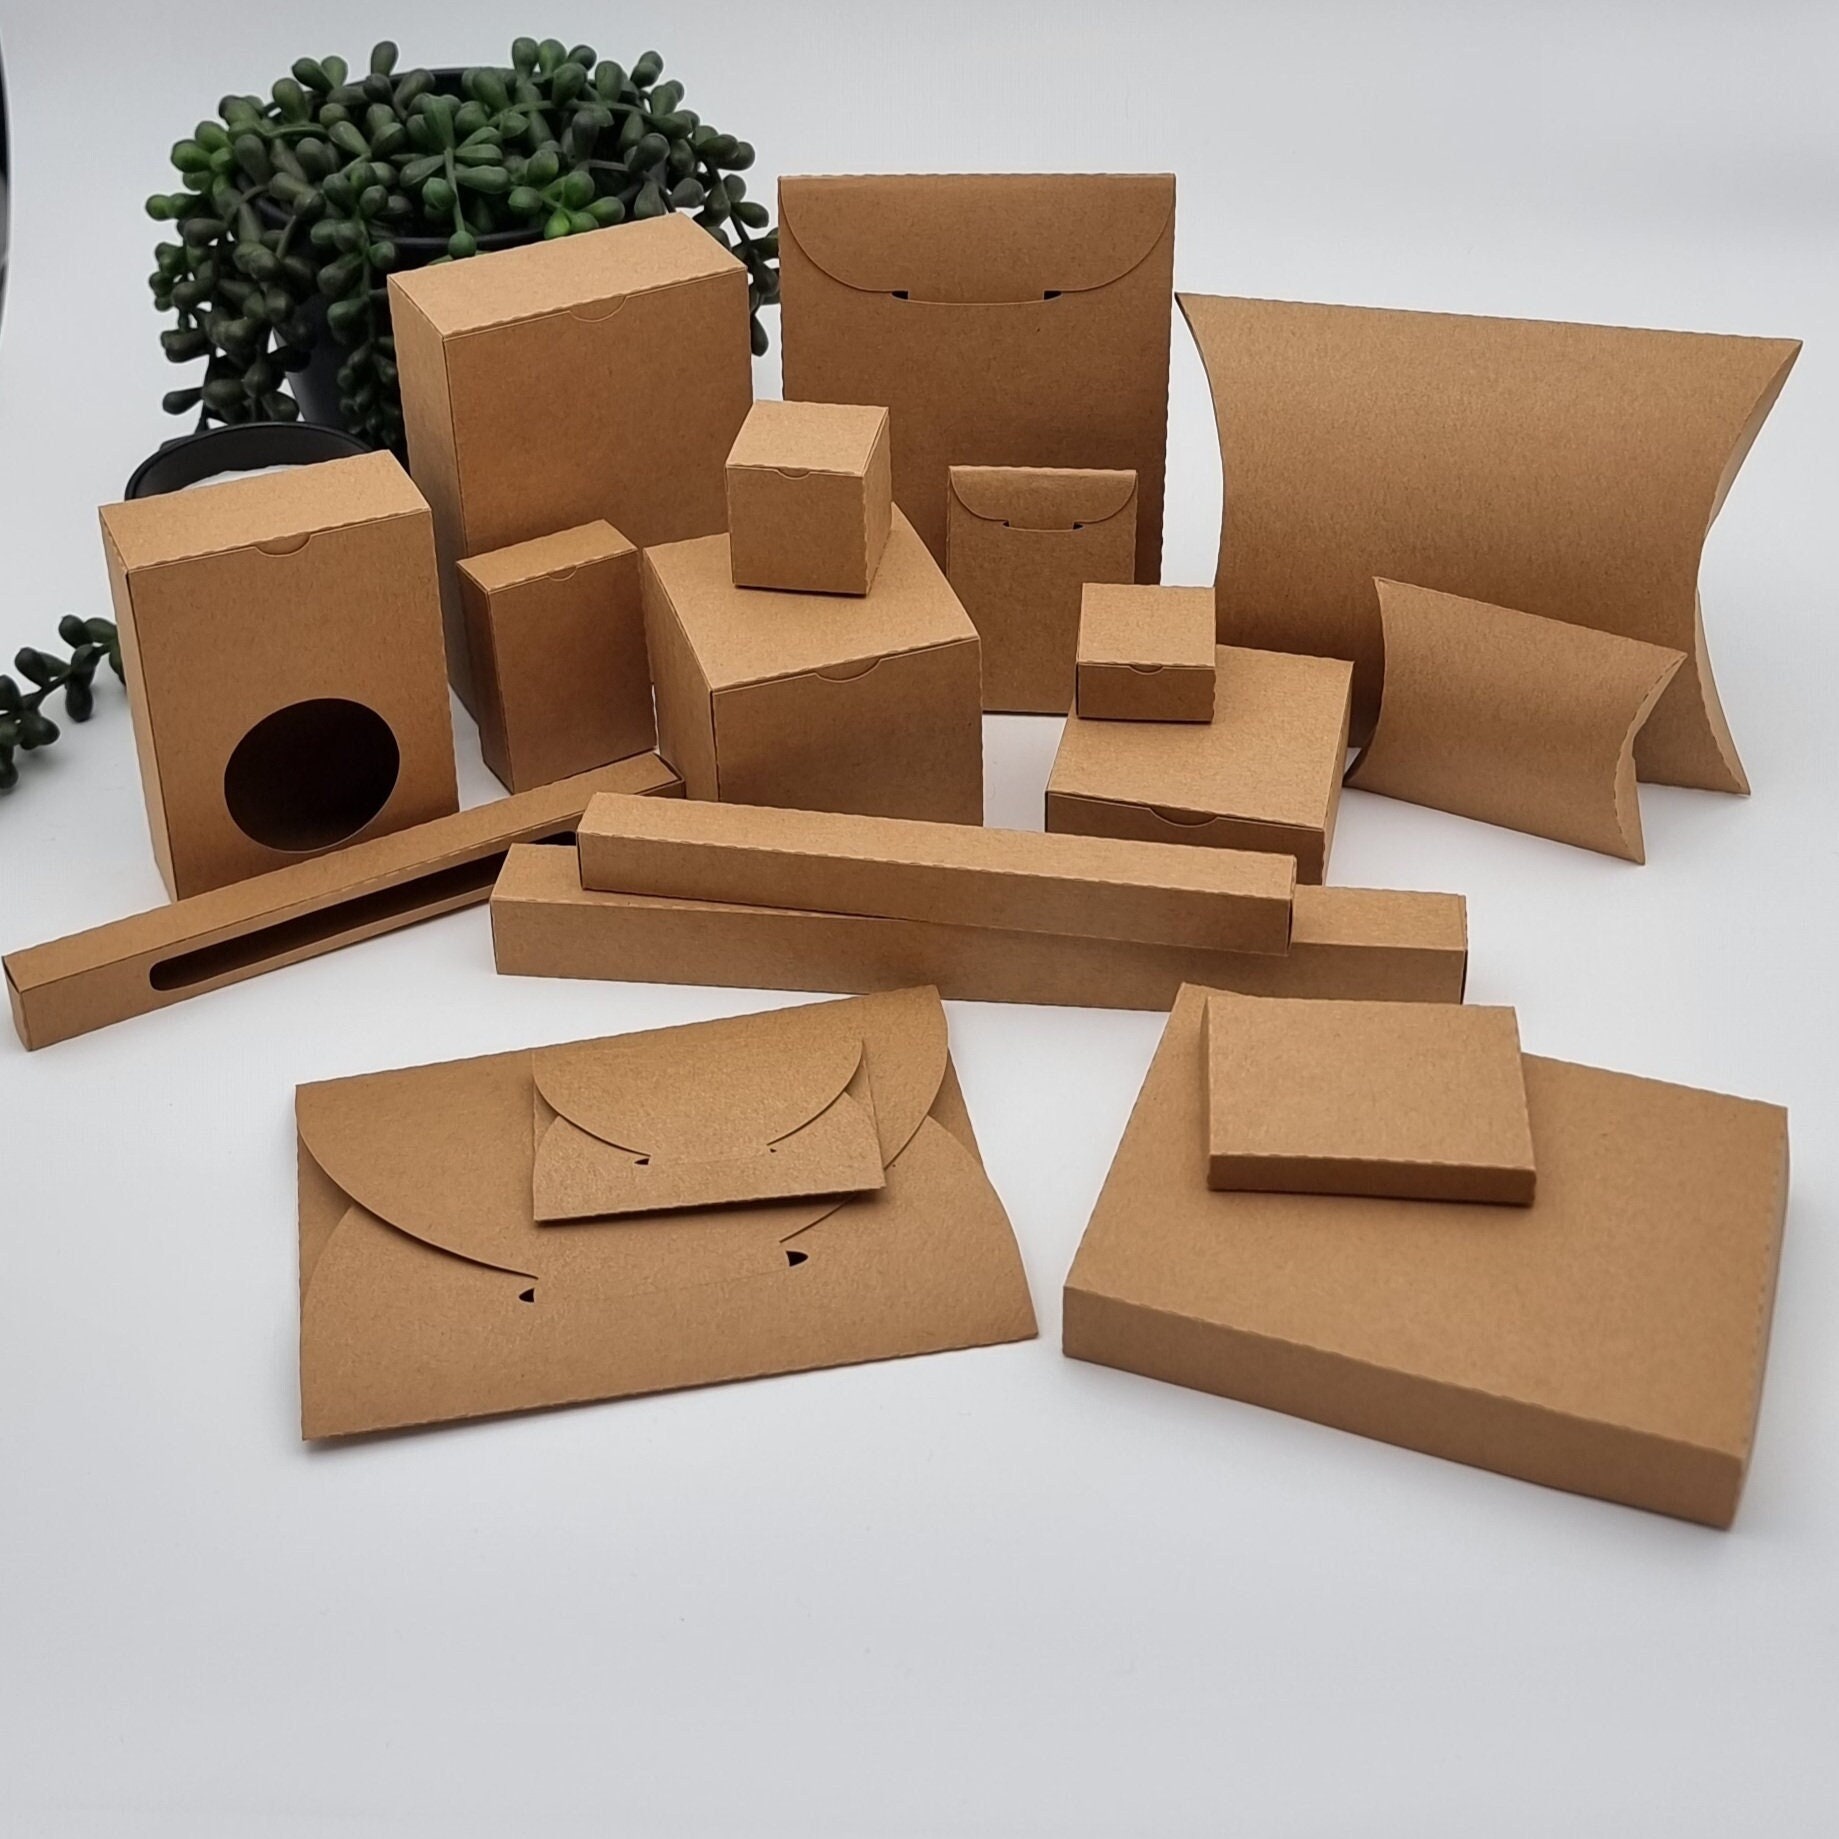 Square Shipping Boxes With Lids Different Sizes Mailing Boxes Manufacturer  Cardboard Box Packing Boxes Paper Box Gift Boxes Free Shipping 